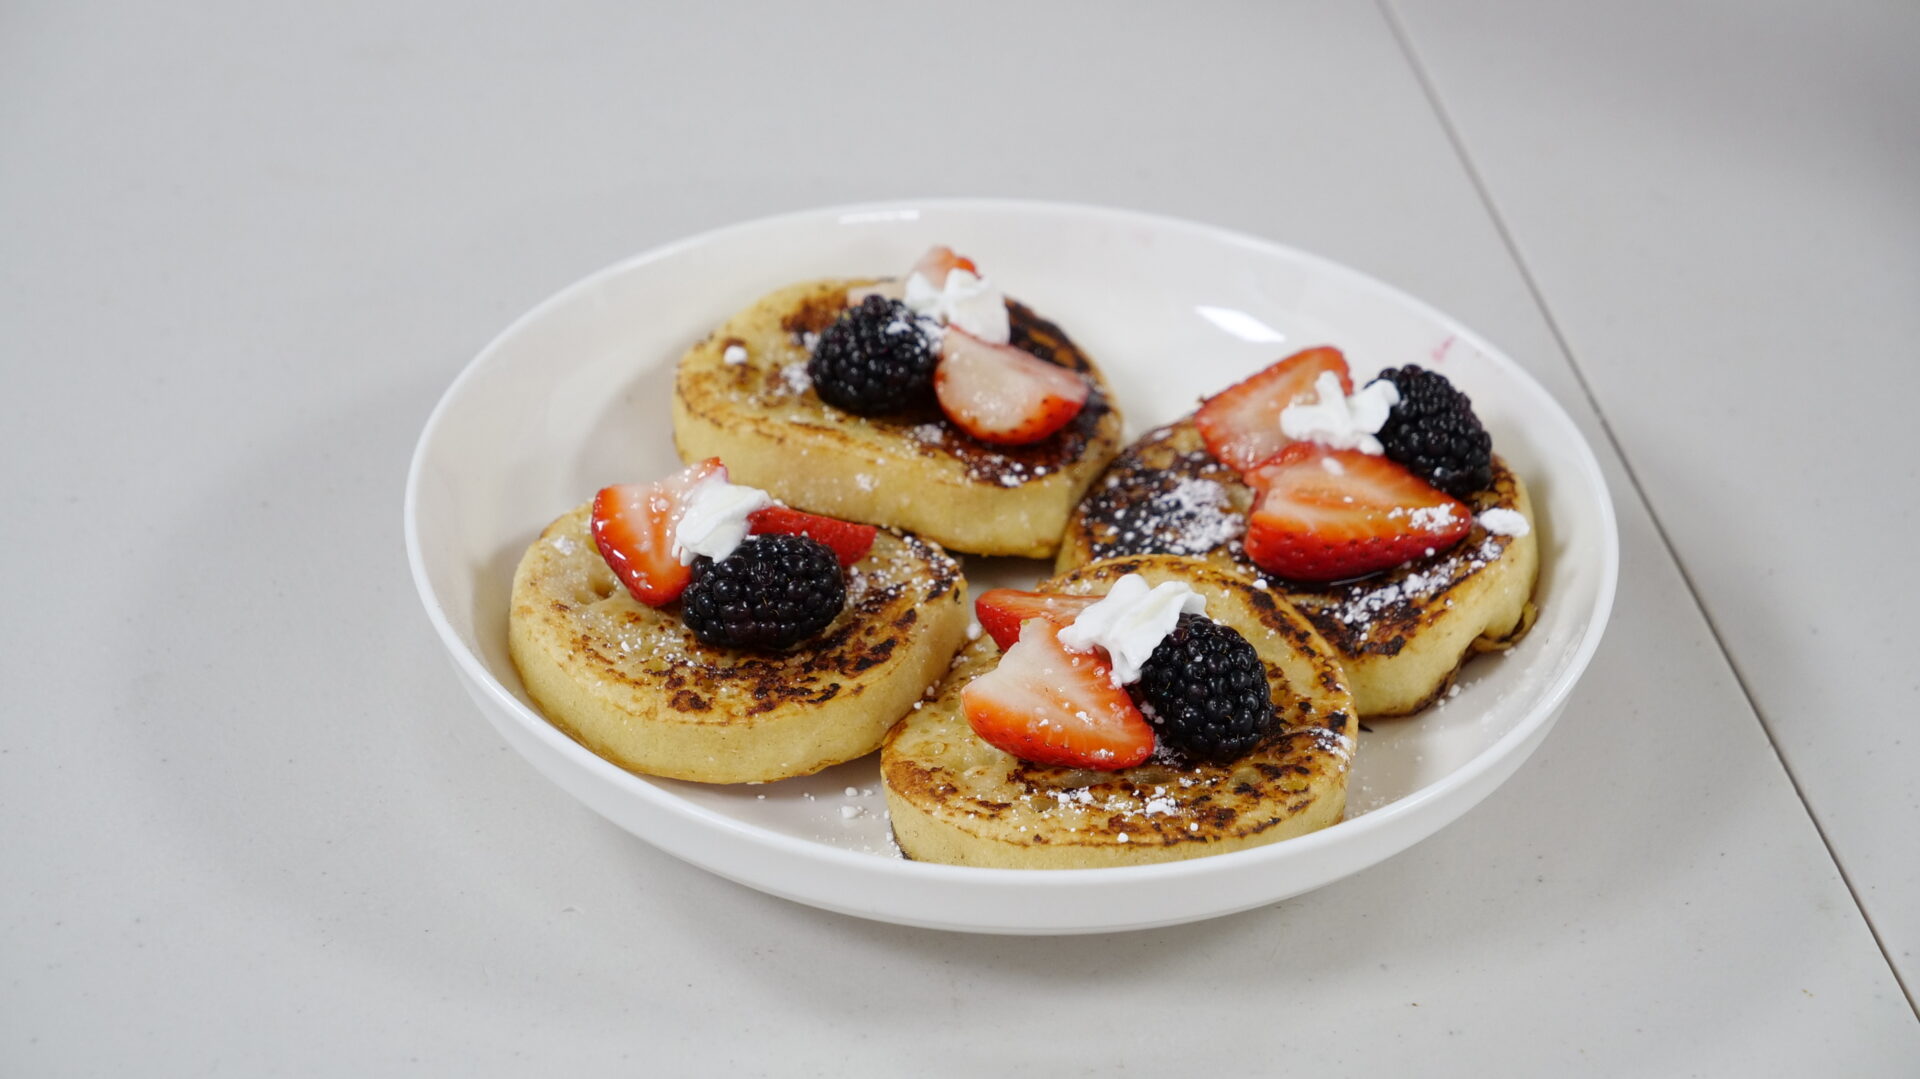 A plate of pancakes with strawberries and blueberries.